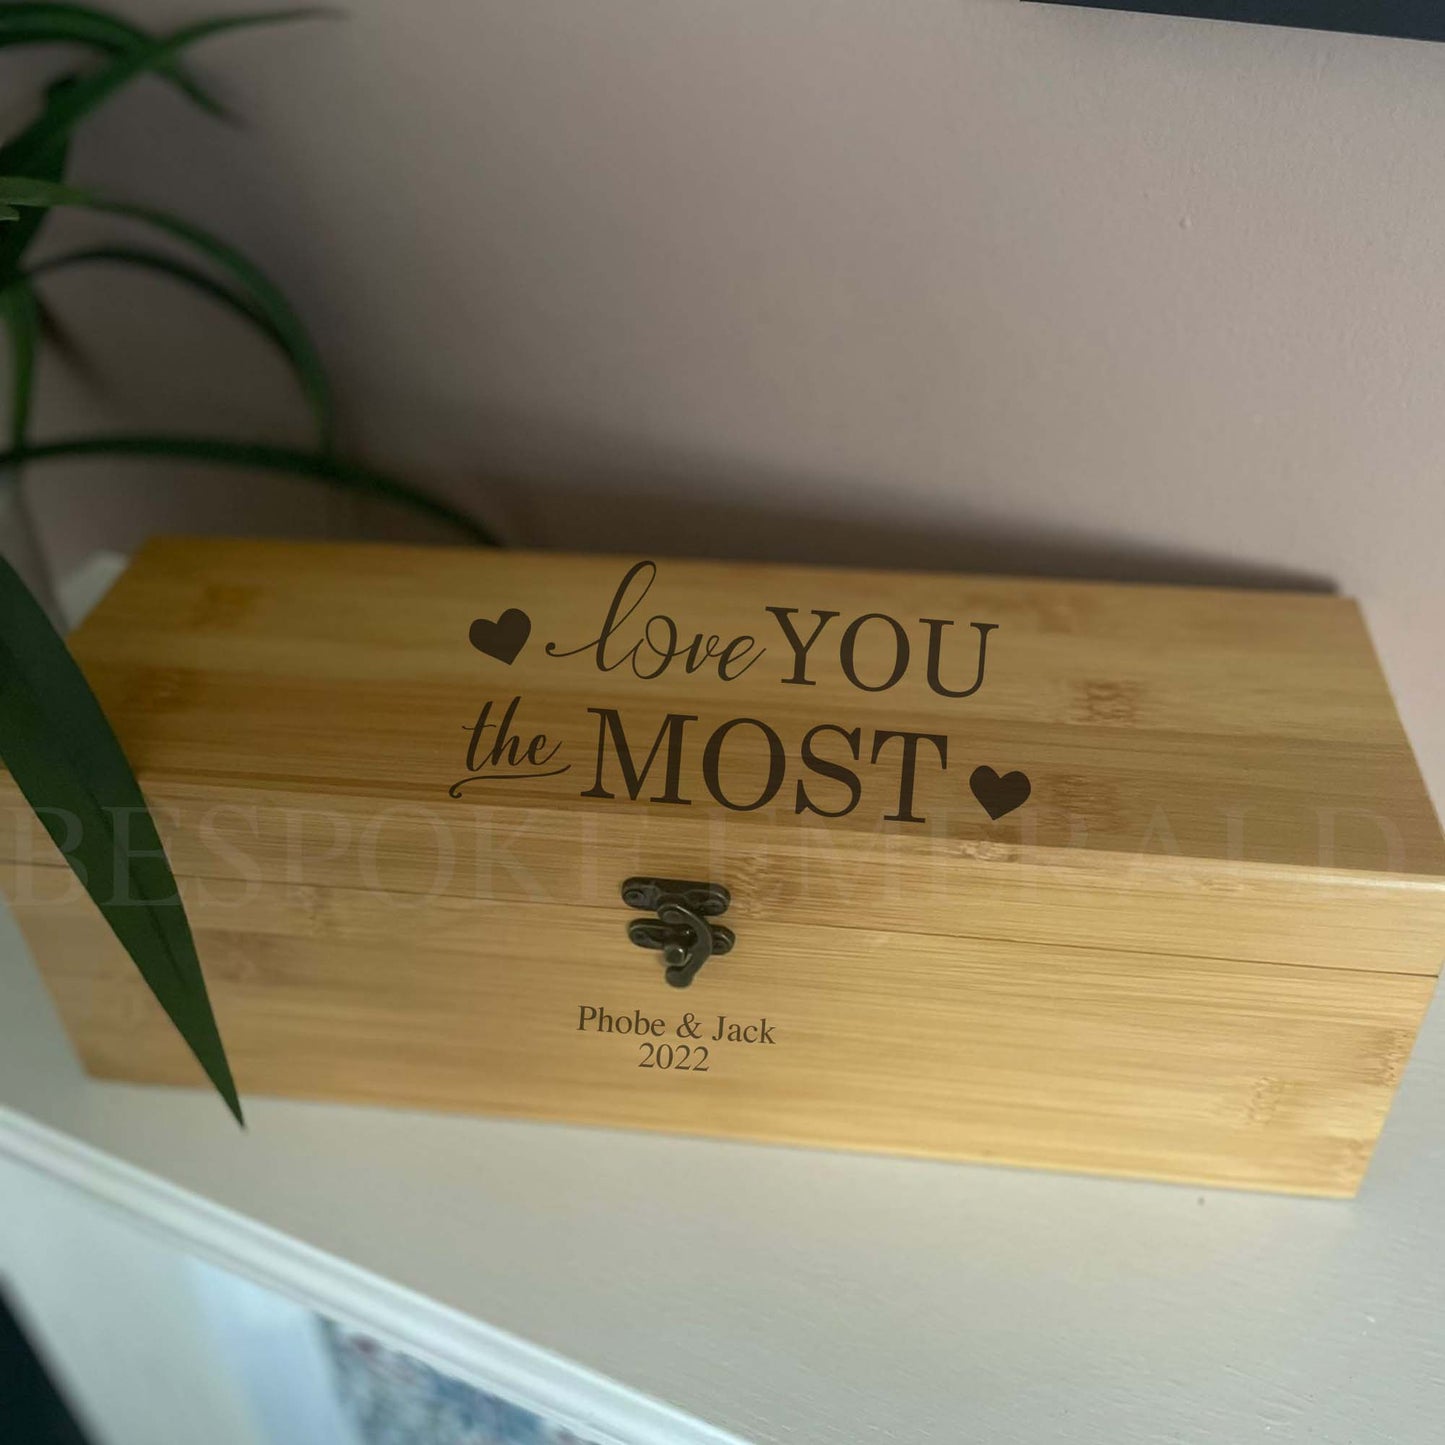 Love you the most personalised wine box - Bespoke Emerald Embroidery Ltd